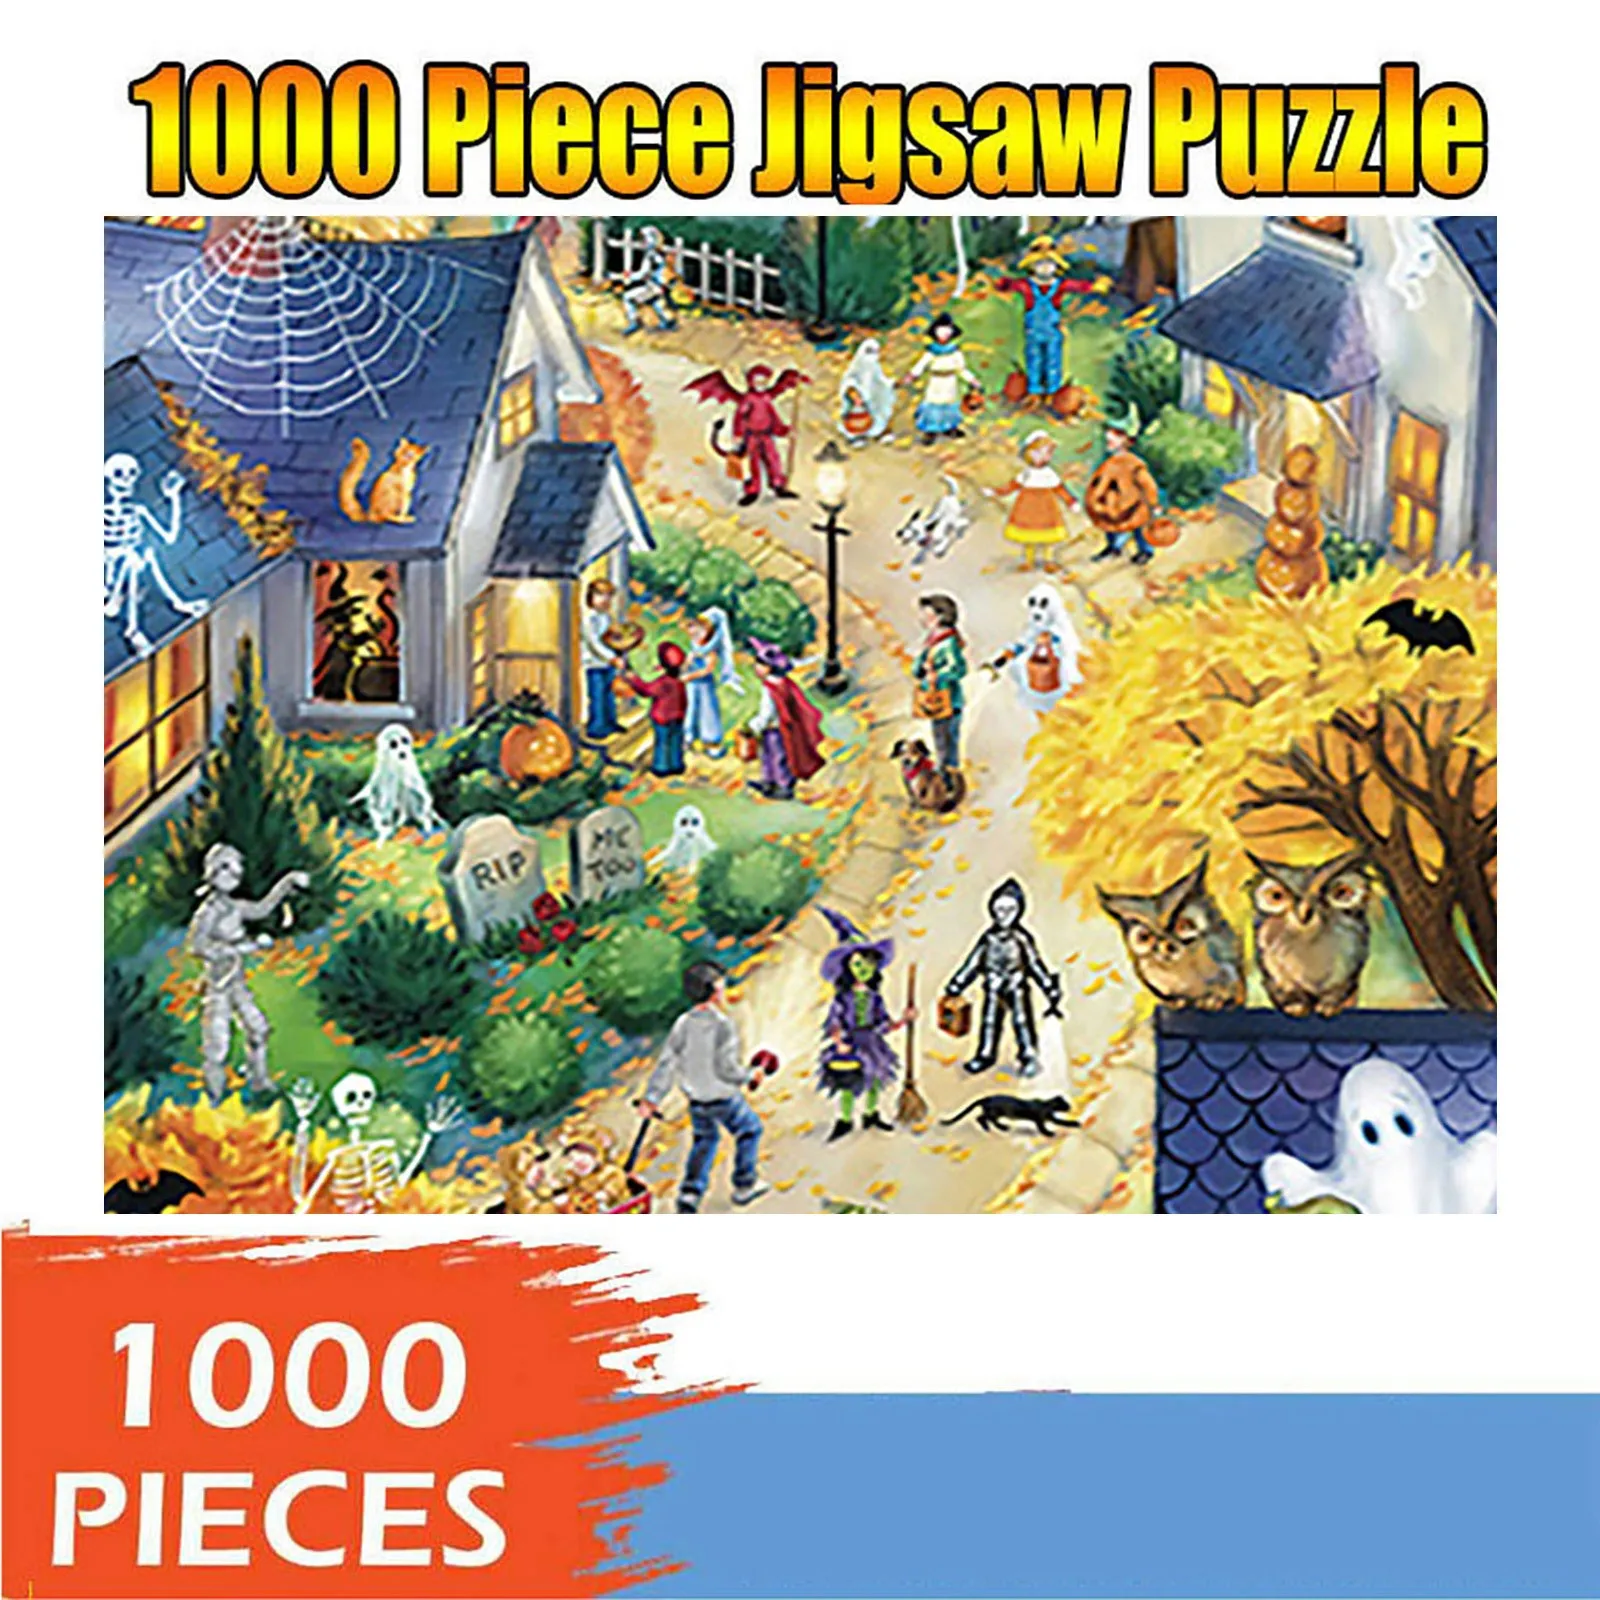 Castle Skull Pumpkin Puzzle Intellective Learning Decompression Game A LINGDANG Halloween Puzzles for Adult Children 1000 Piece Leisure Time DIY Toys Puzzles for Home Decoration Festival Gift